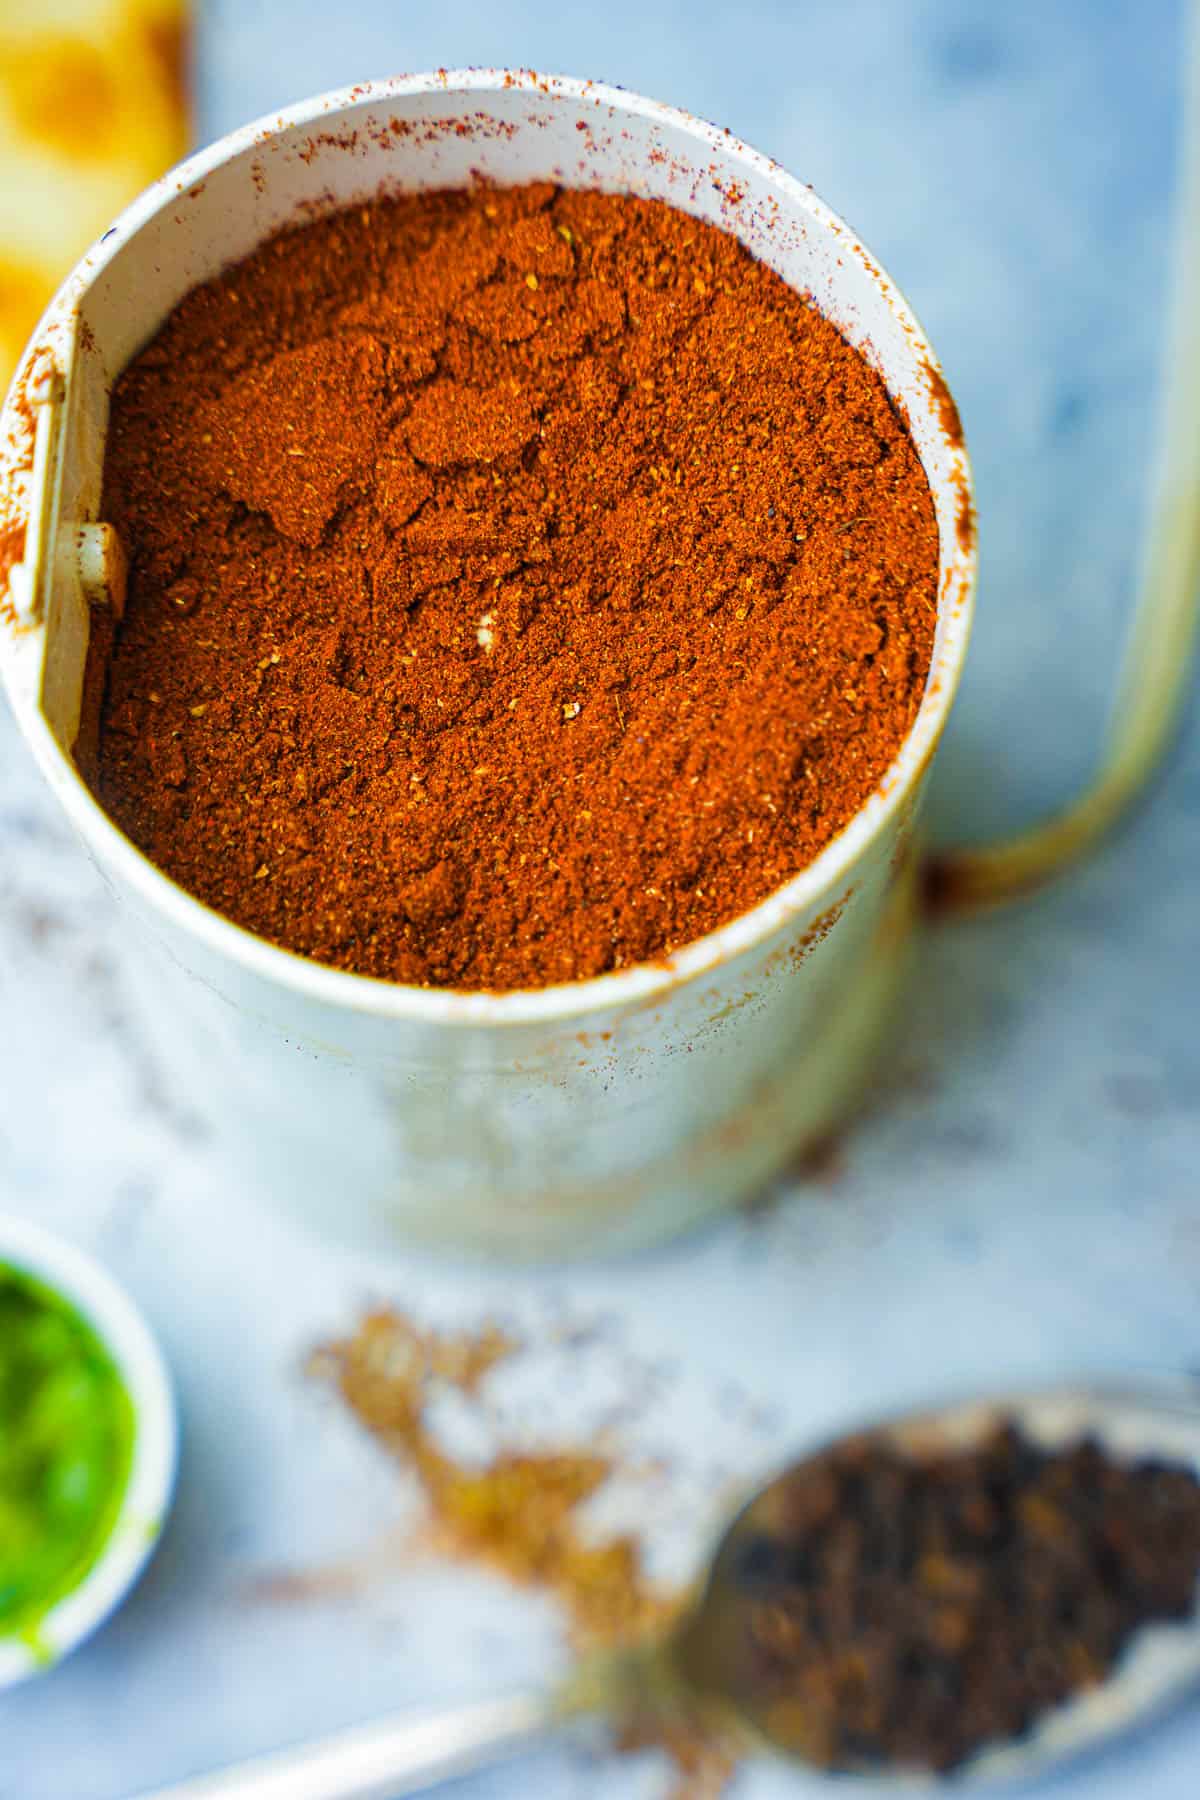 A white spice grinder filled with a mixture of spices and a spoon.